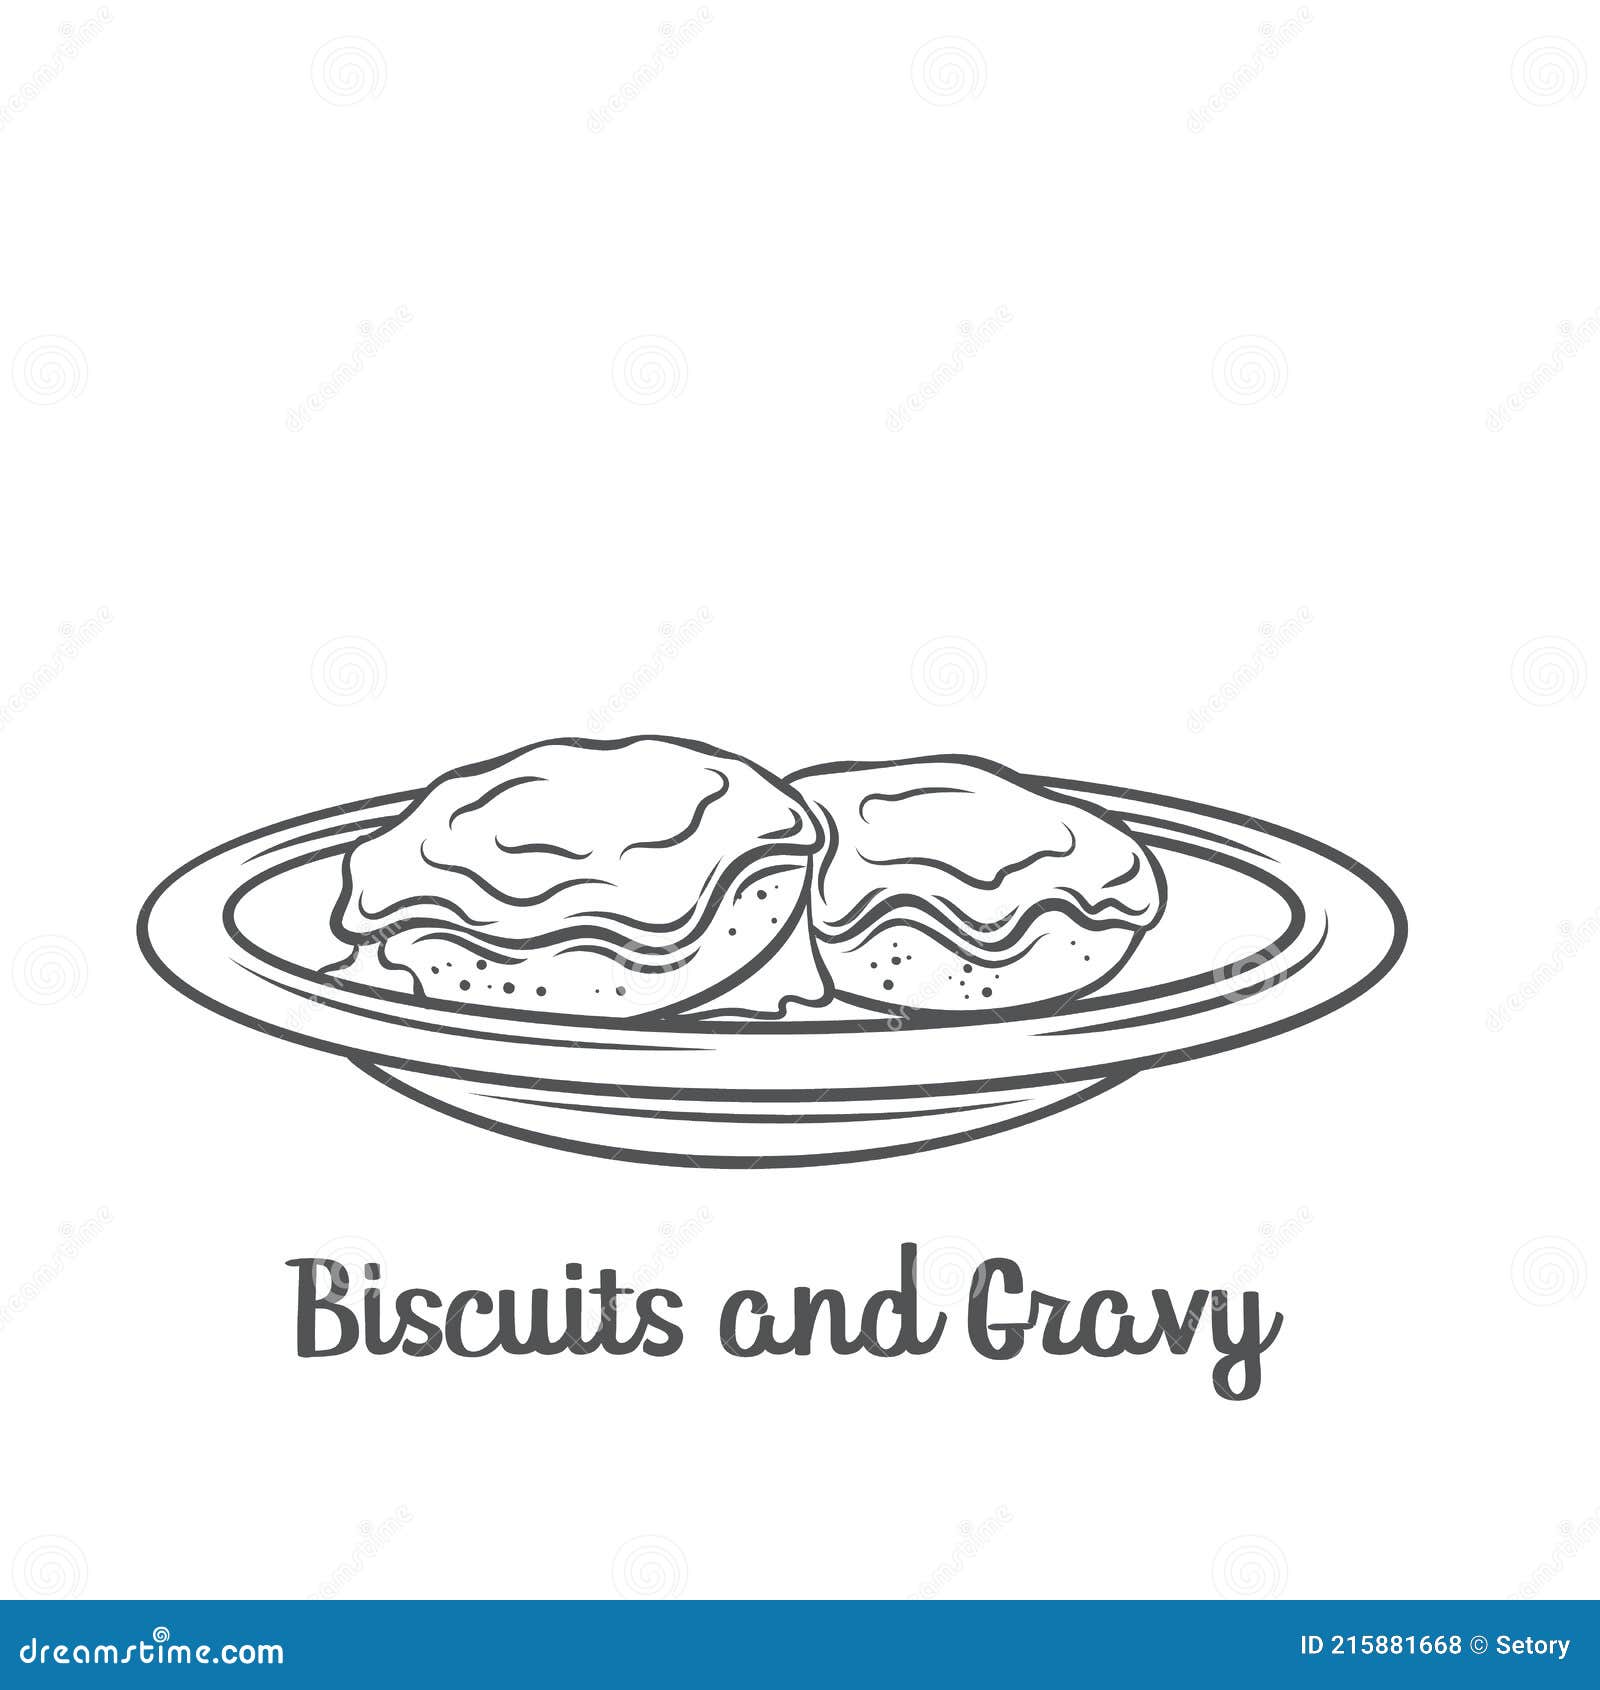 biscuits and gravy outline icon